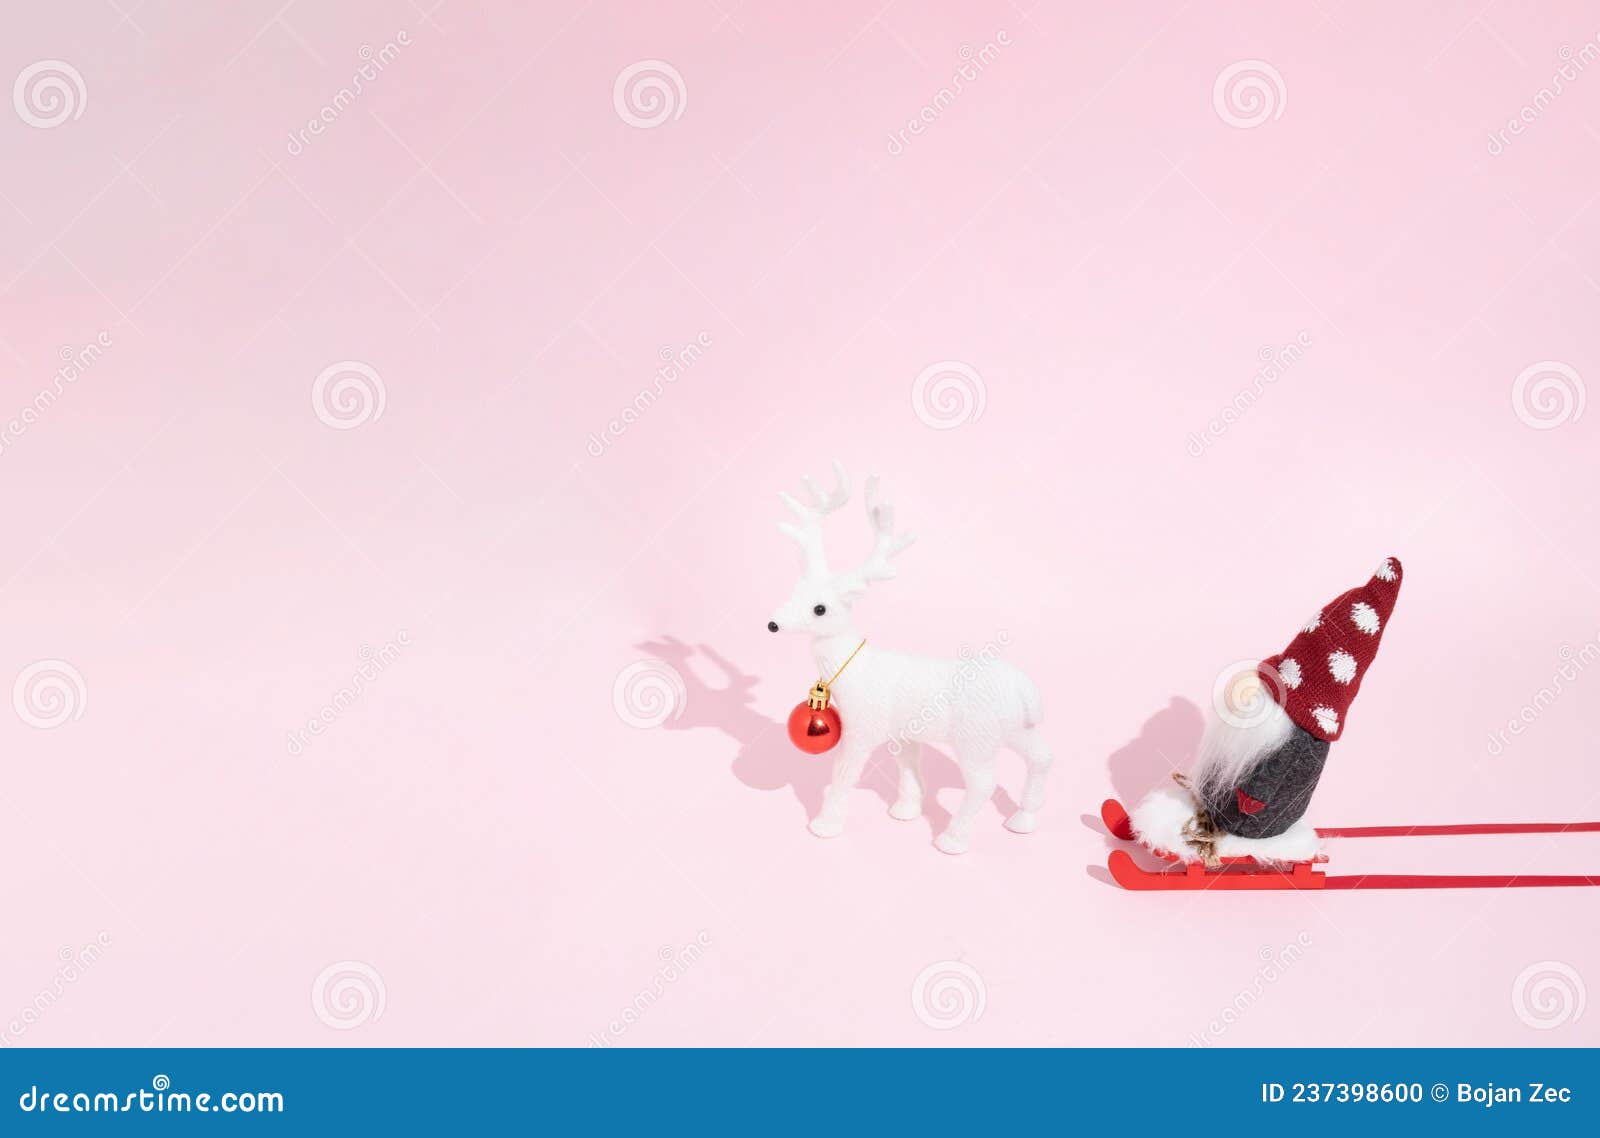 christmas composition on a pastel pink background. santa on a red sled and one white reindeer, red decoracion bauble. xmas and